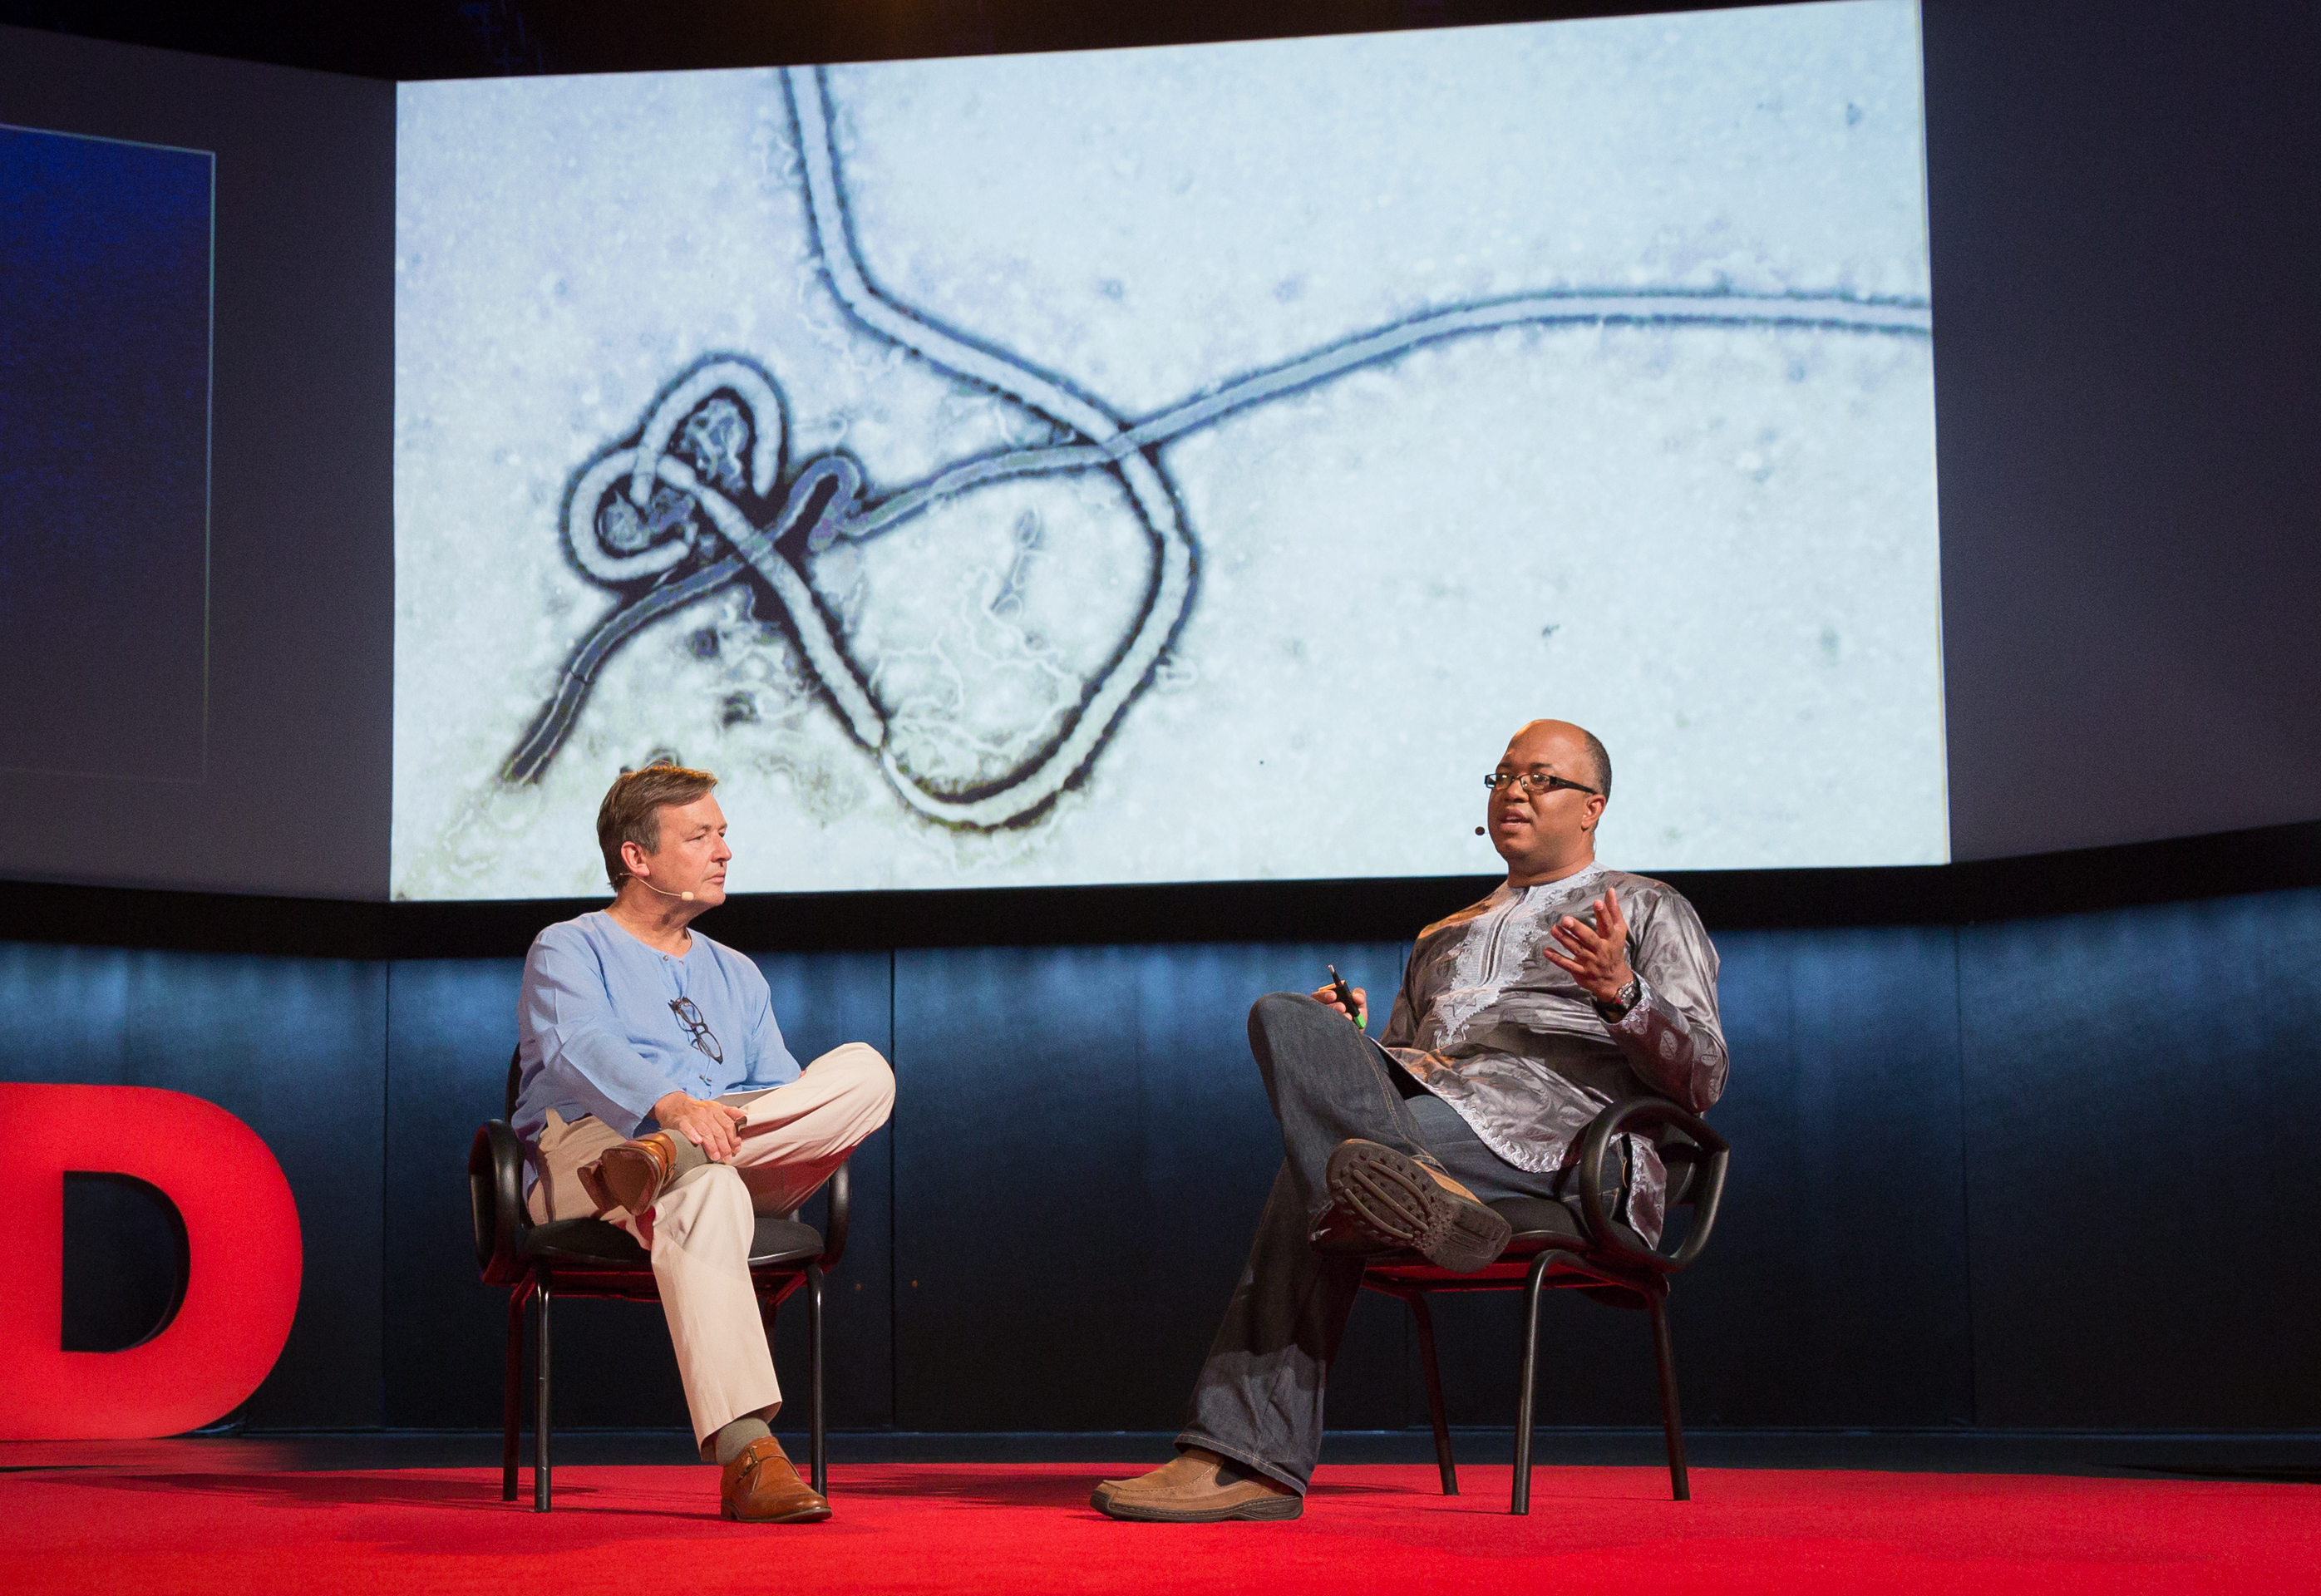 In case you missed it: Day 4 of TEDGlobal 2014